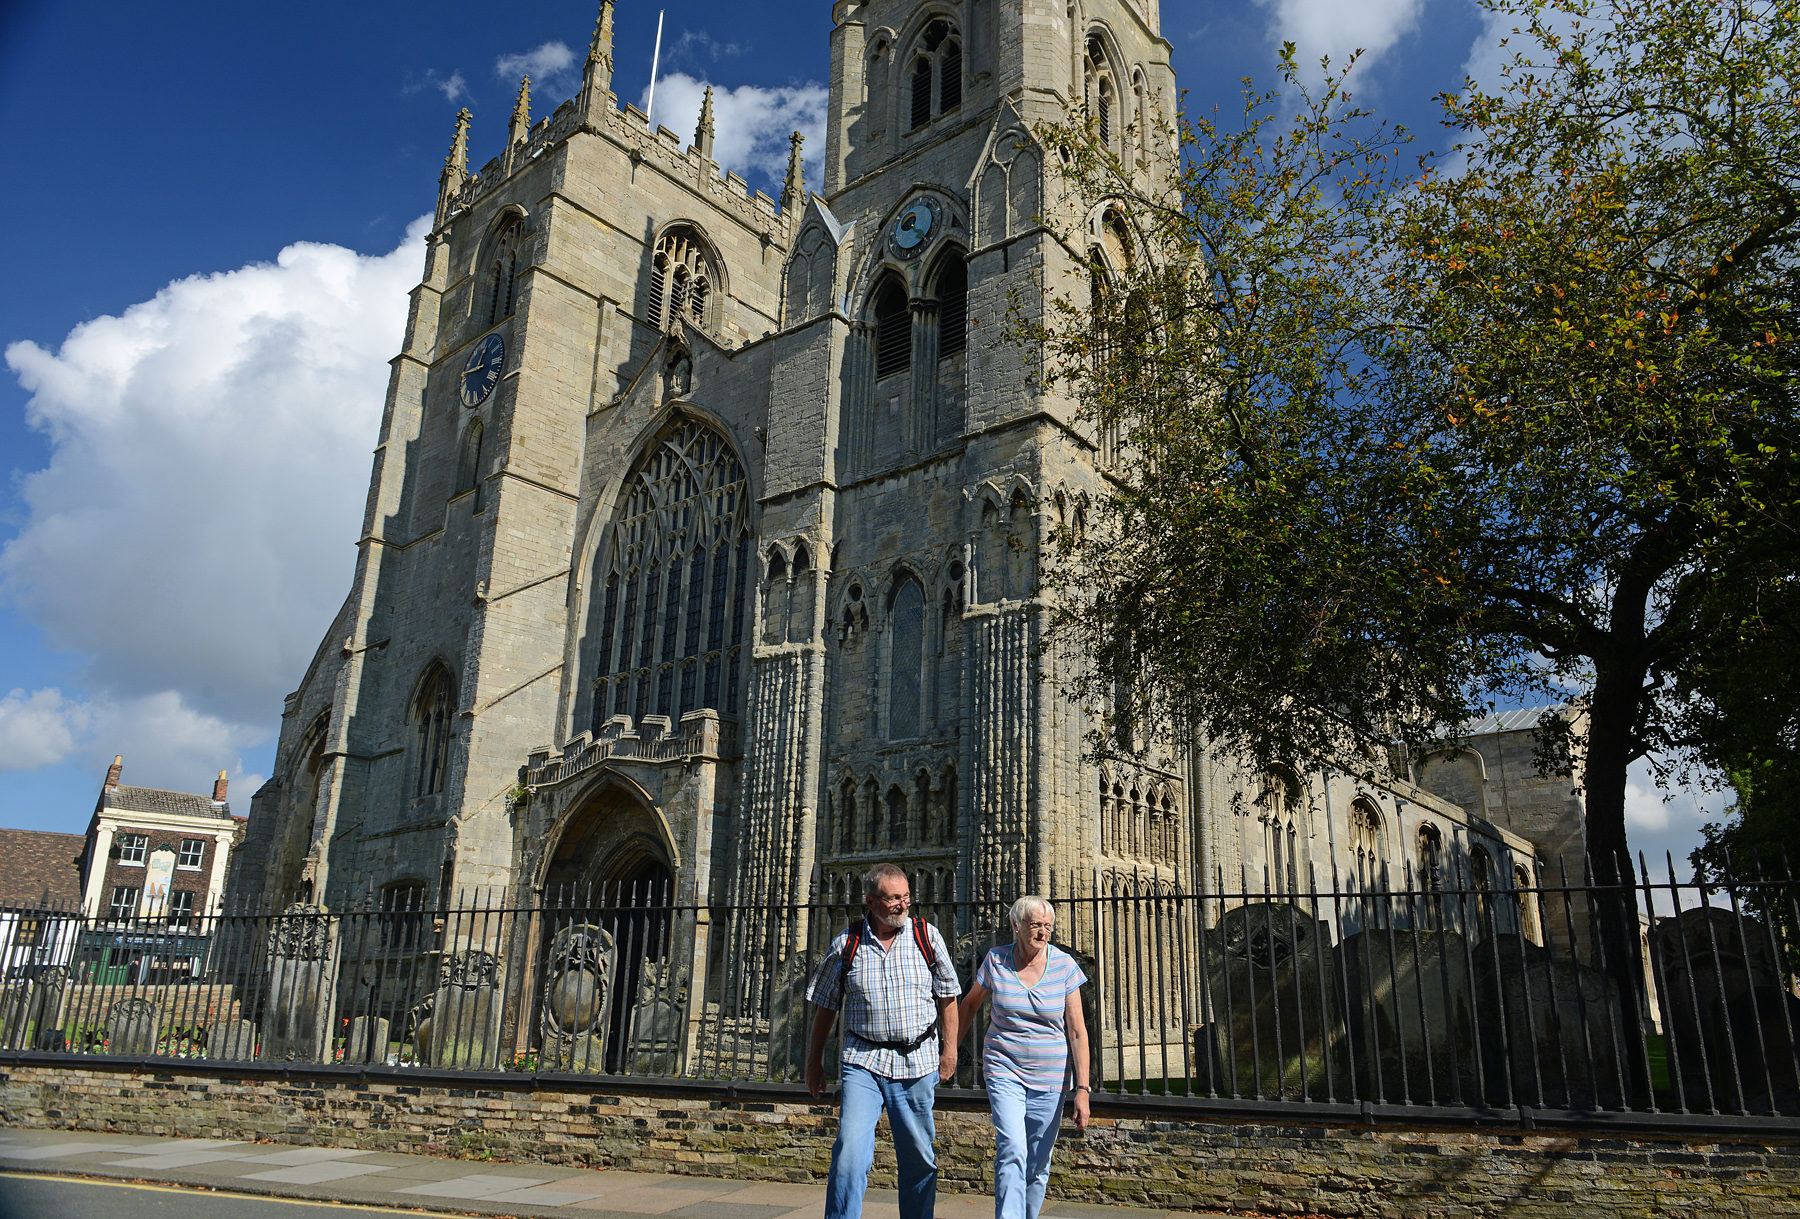 King's Lynn Minster - the starting point of the trail